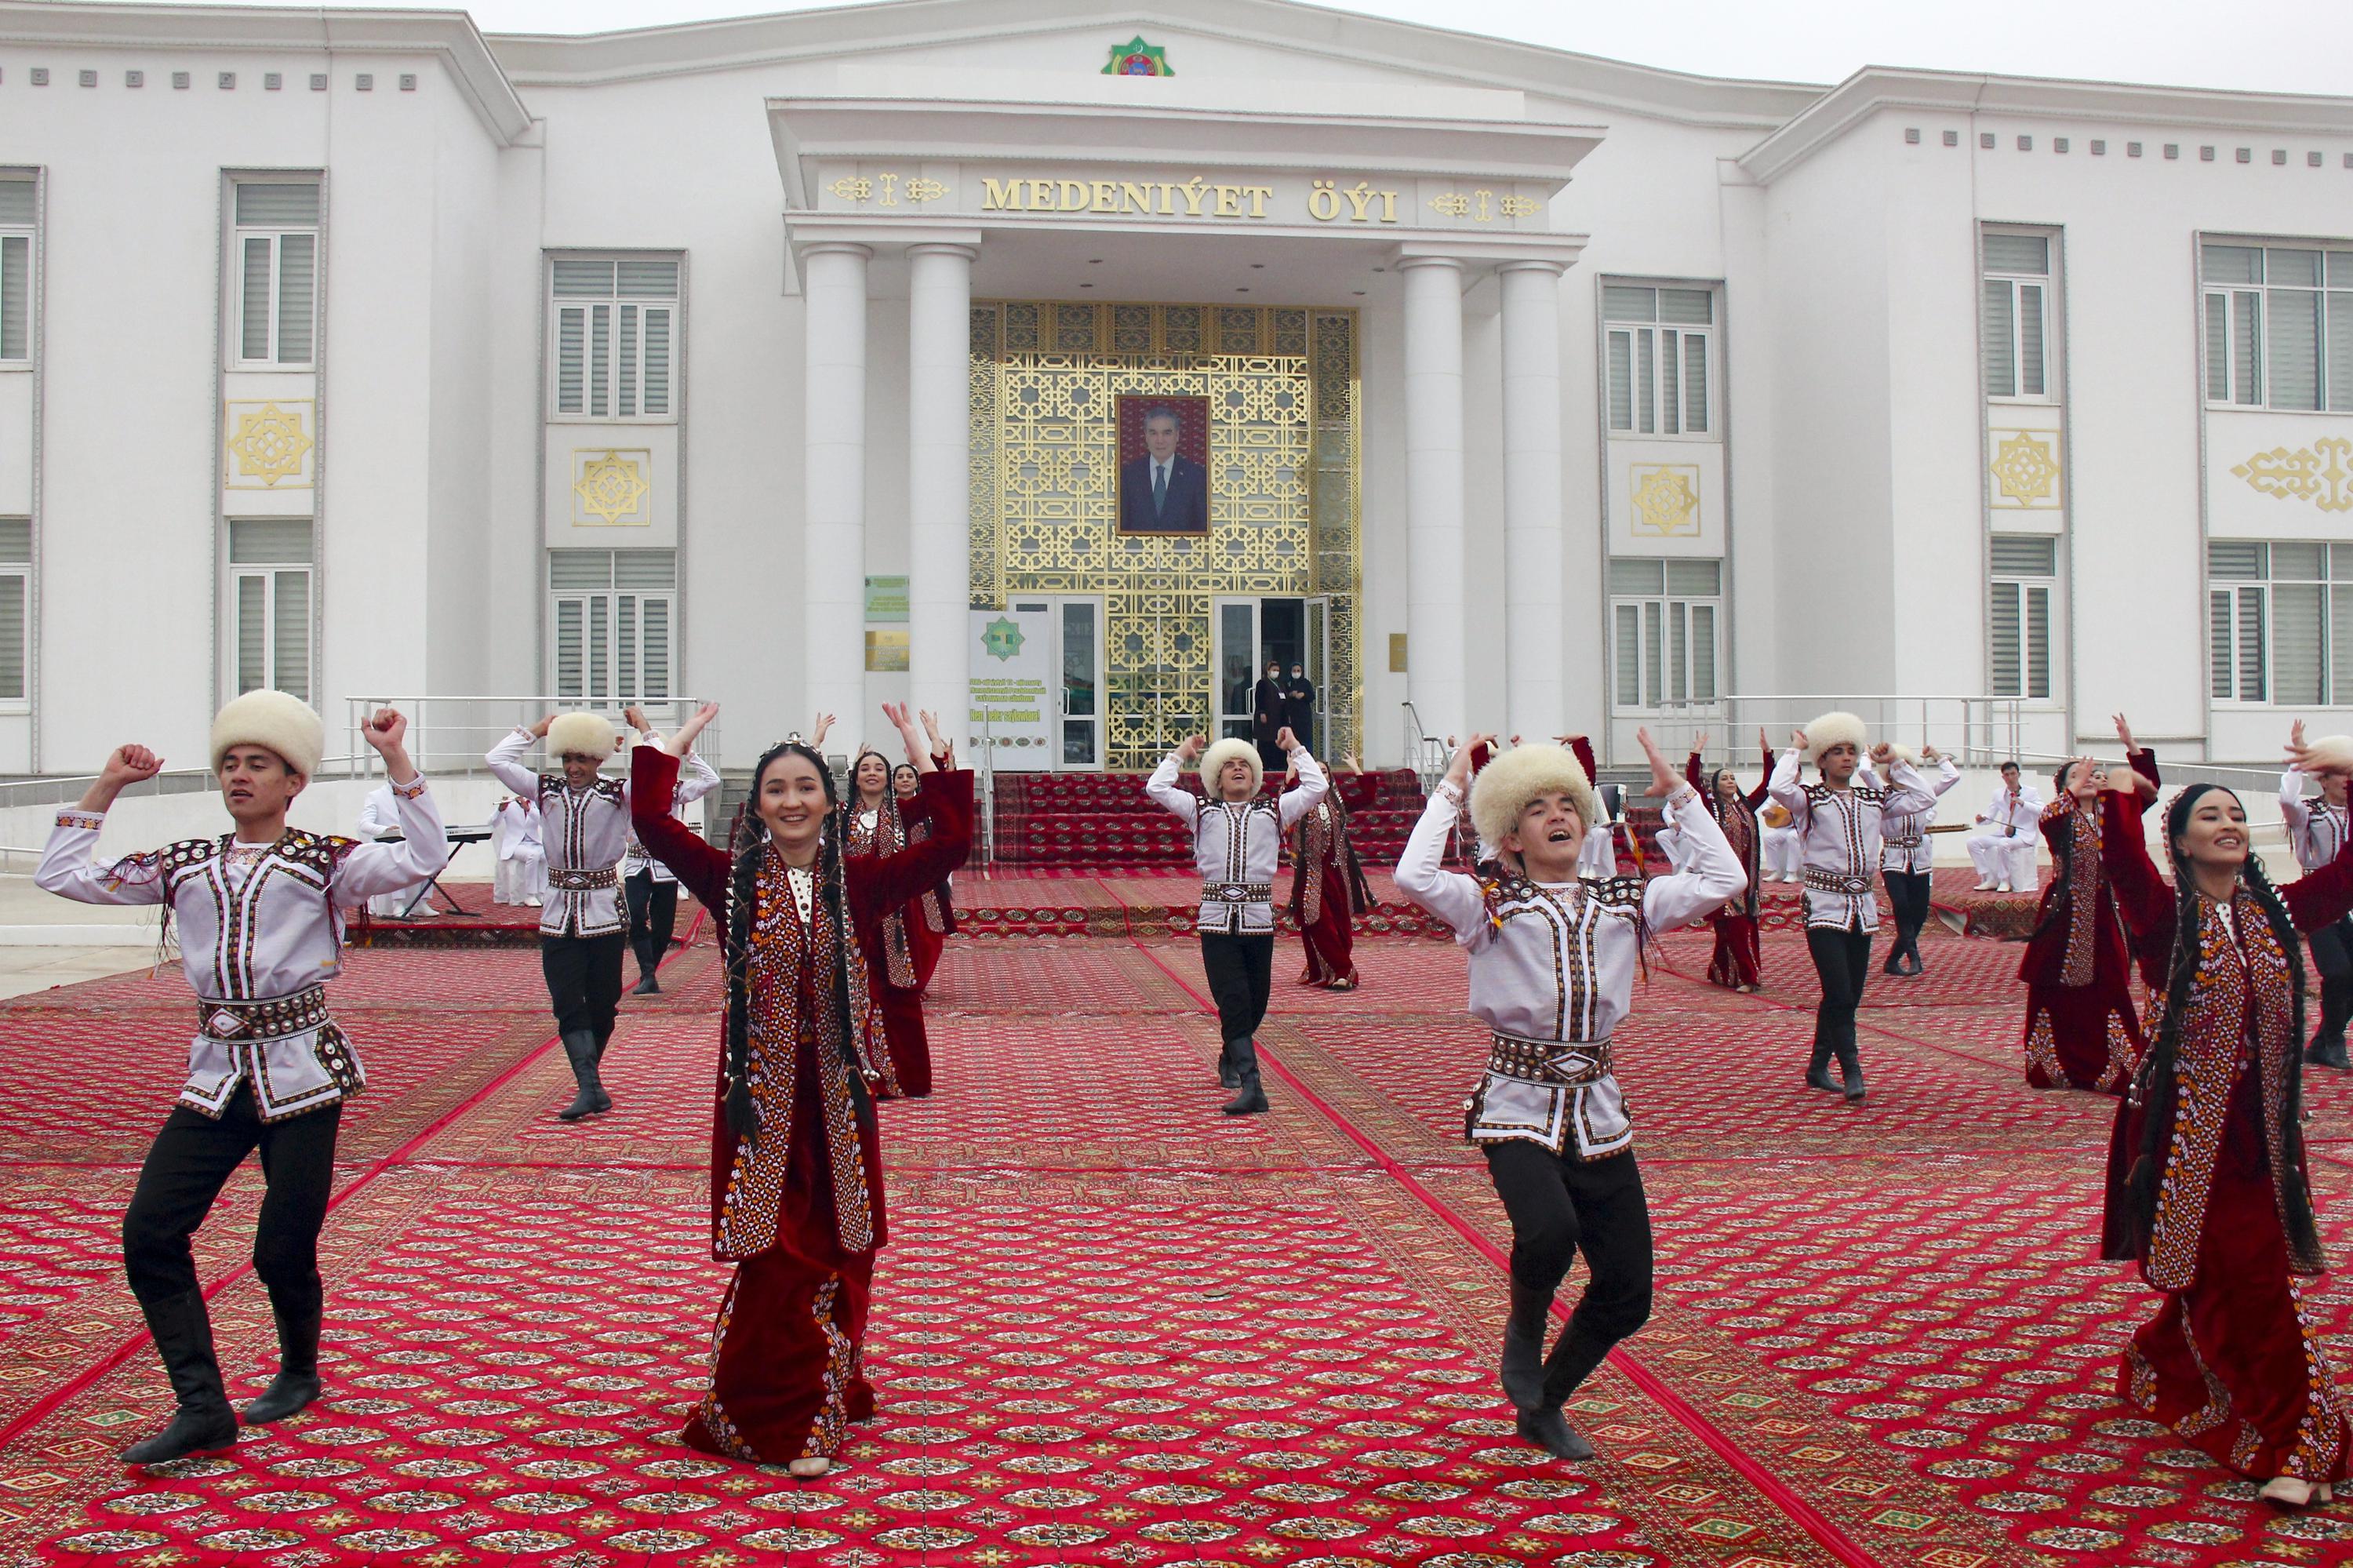 No result yet after Turkmenistan presidential election